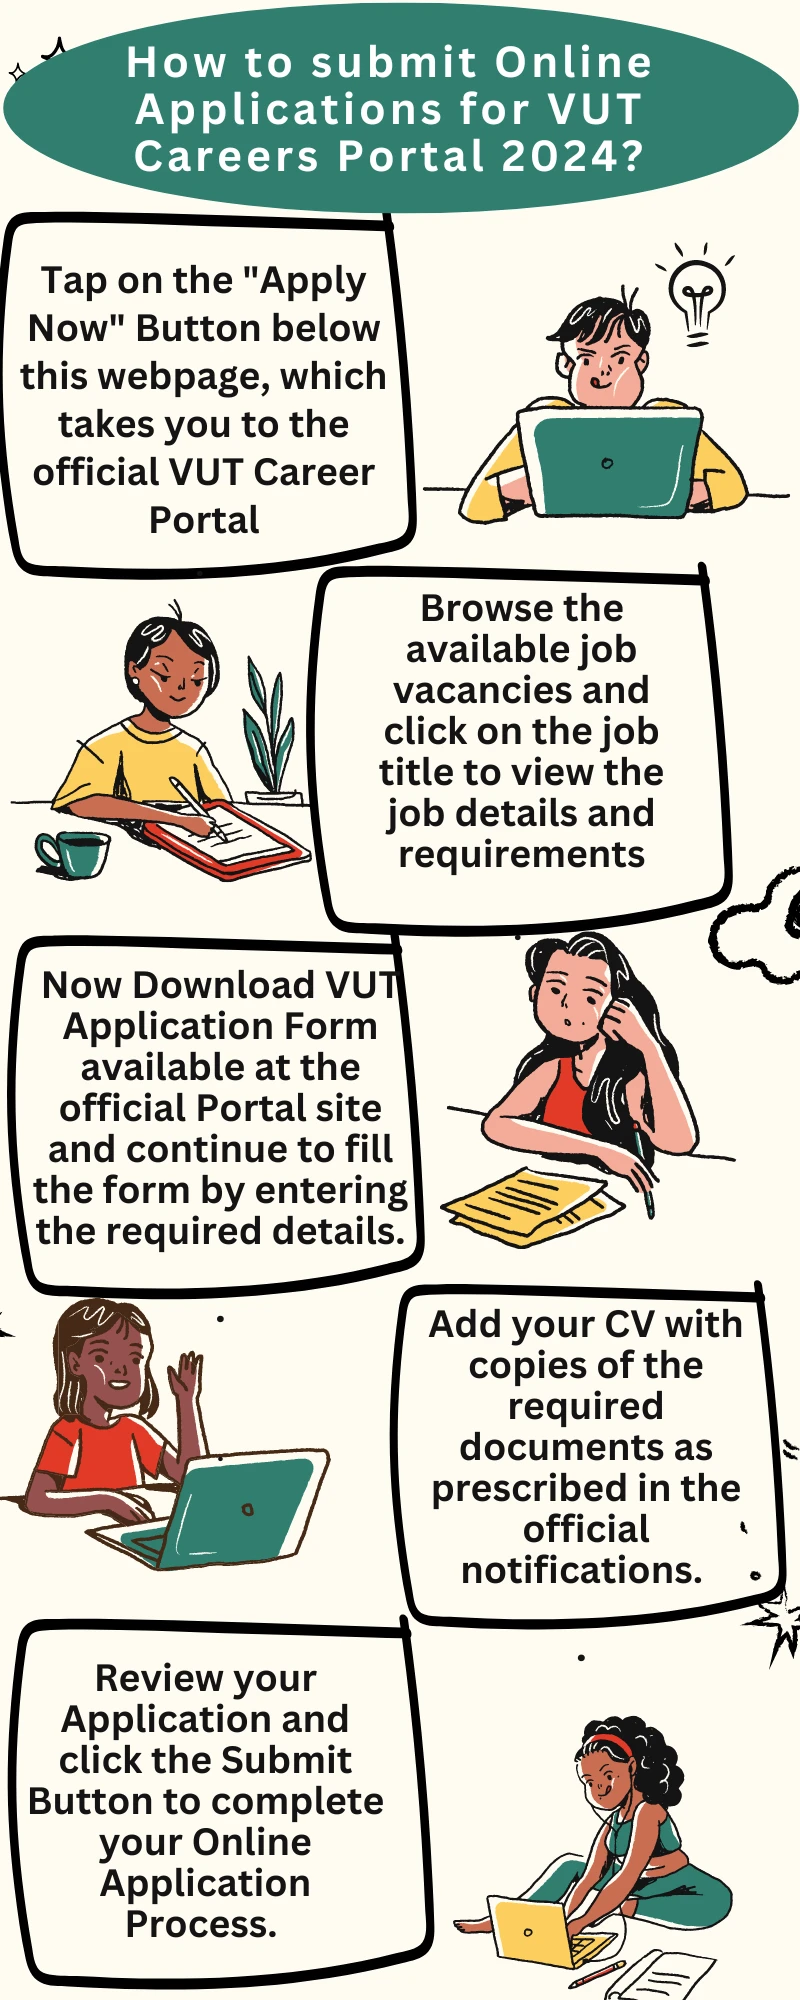 How to submit Online Applications for VUT Careers Portal 2024